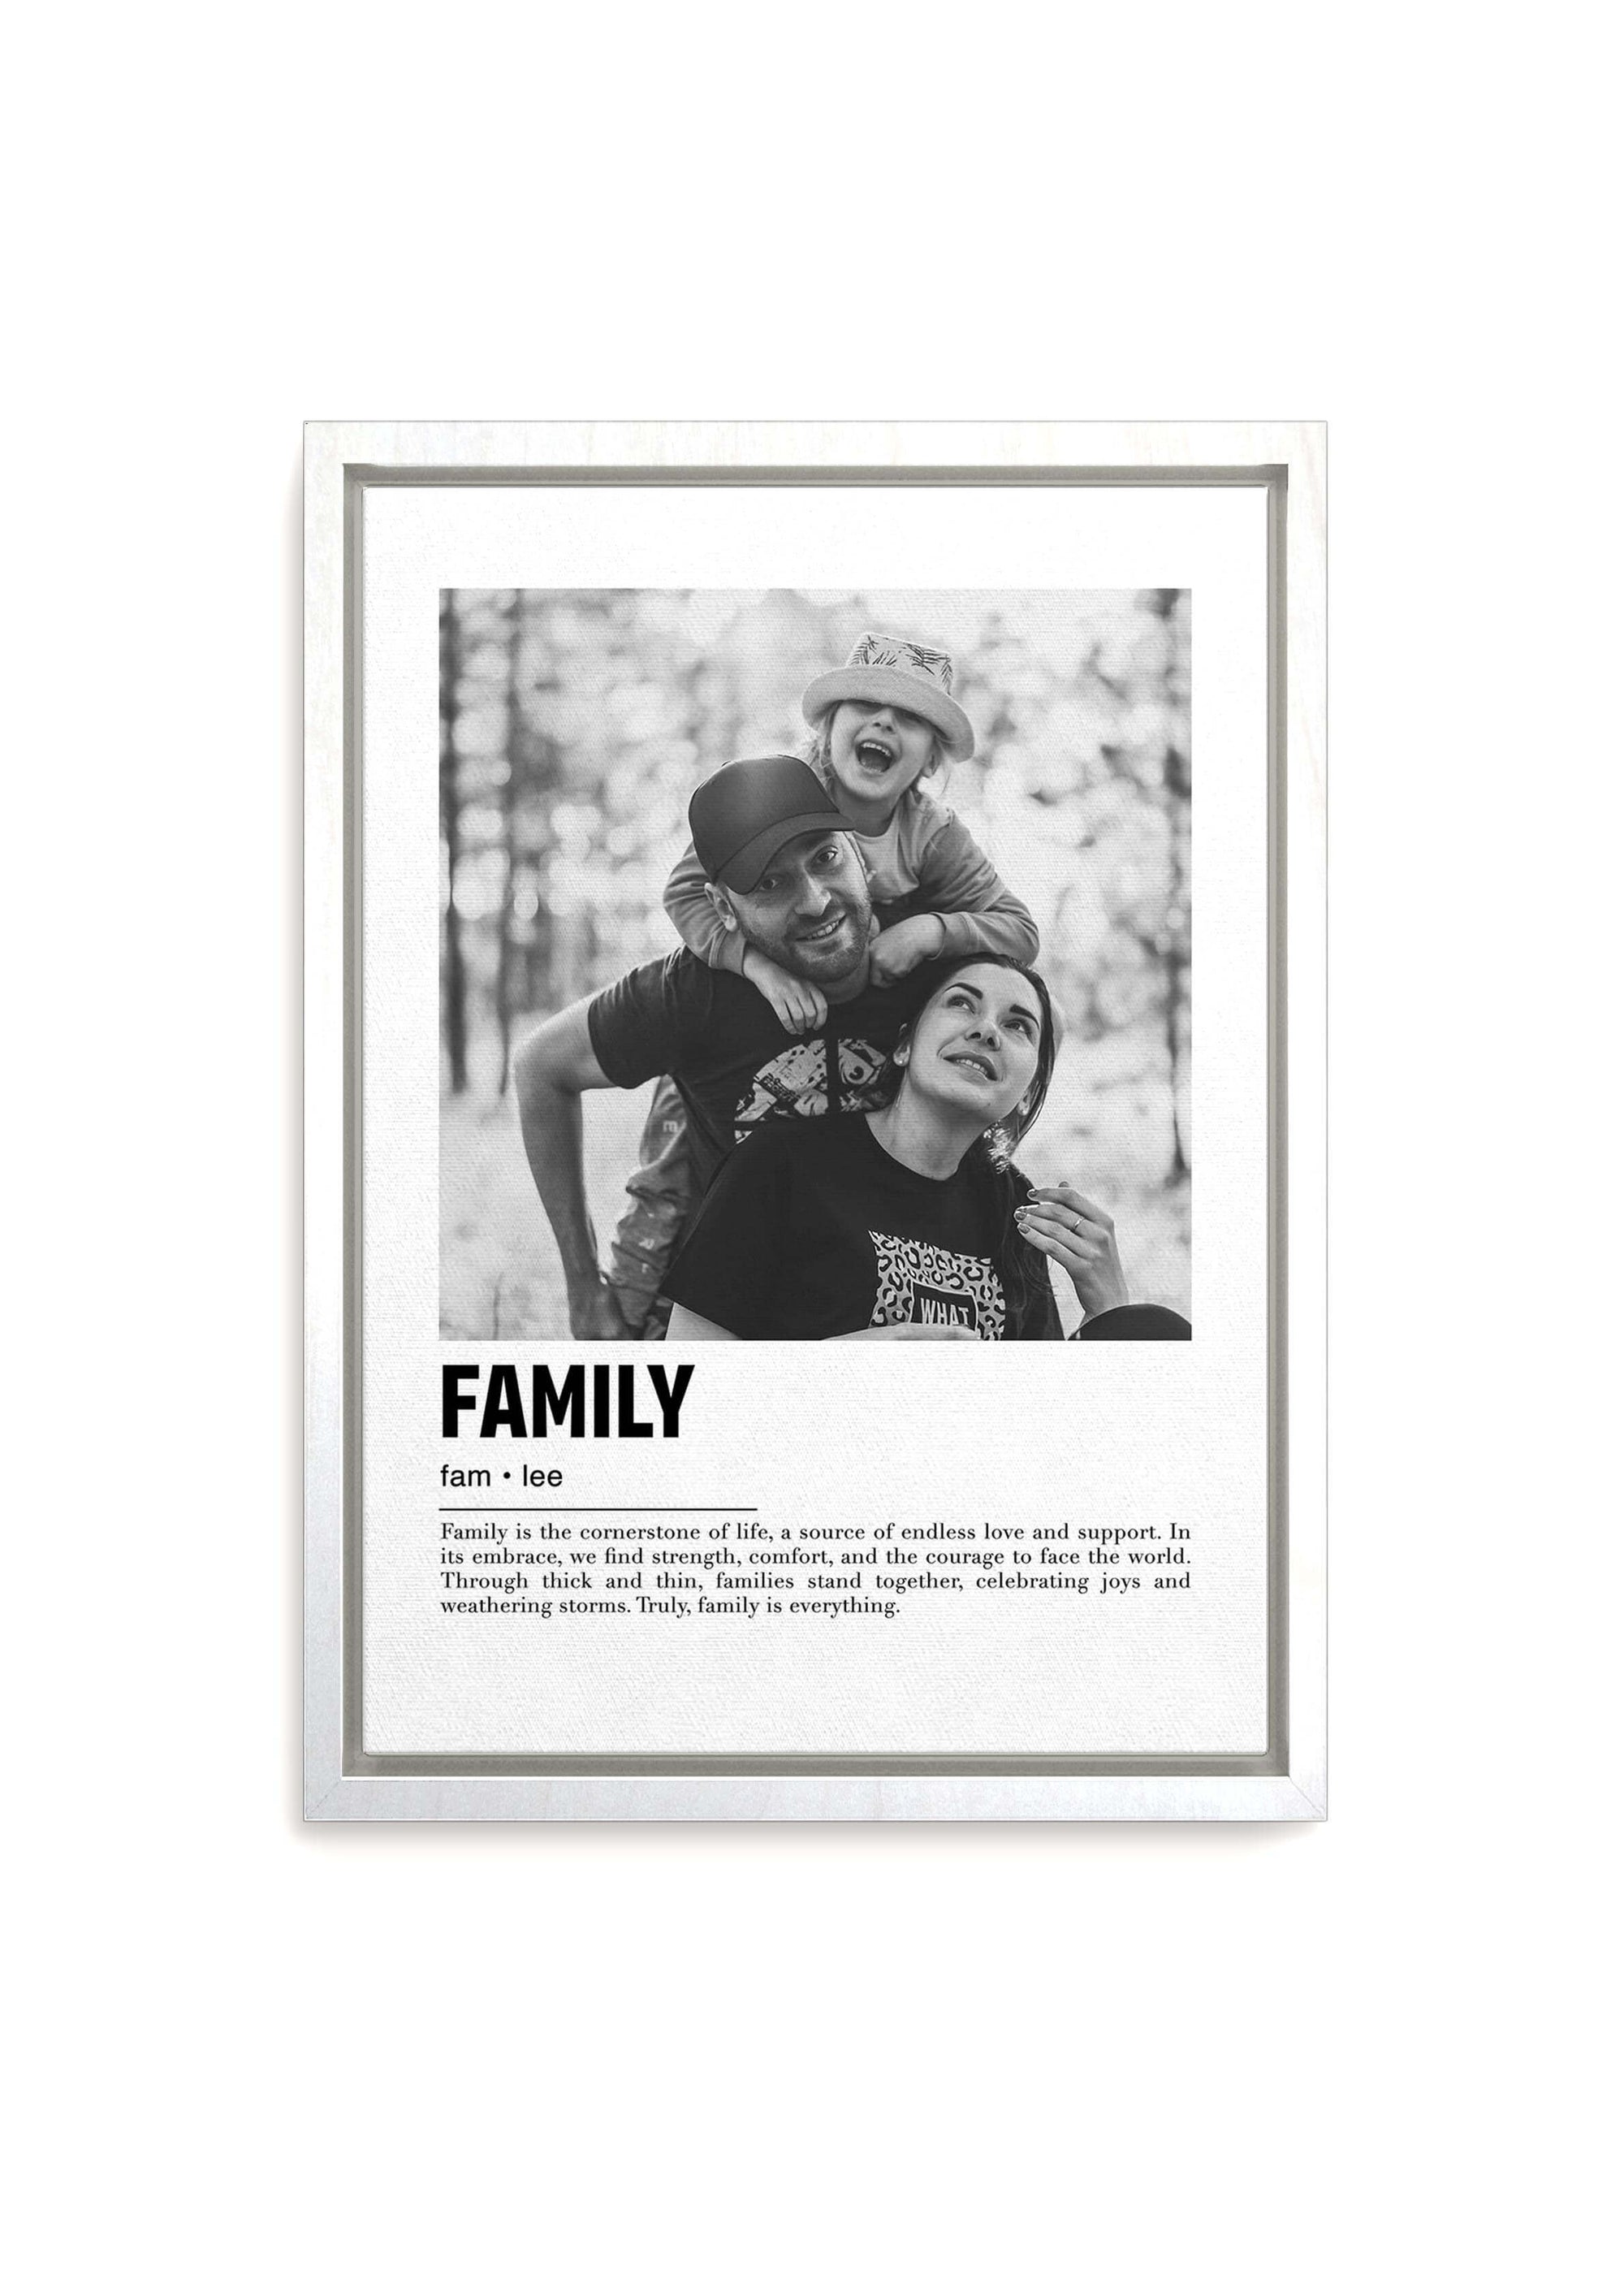 Personalized black and white photo gift on white framed canvas with custom caption on white background.